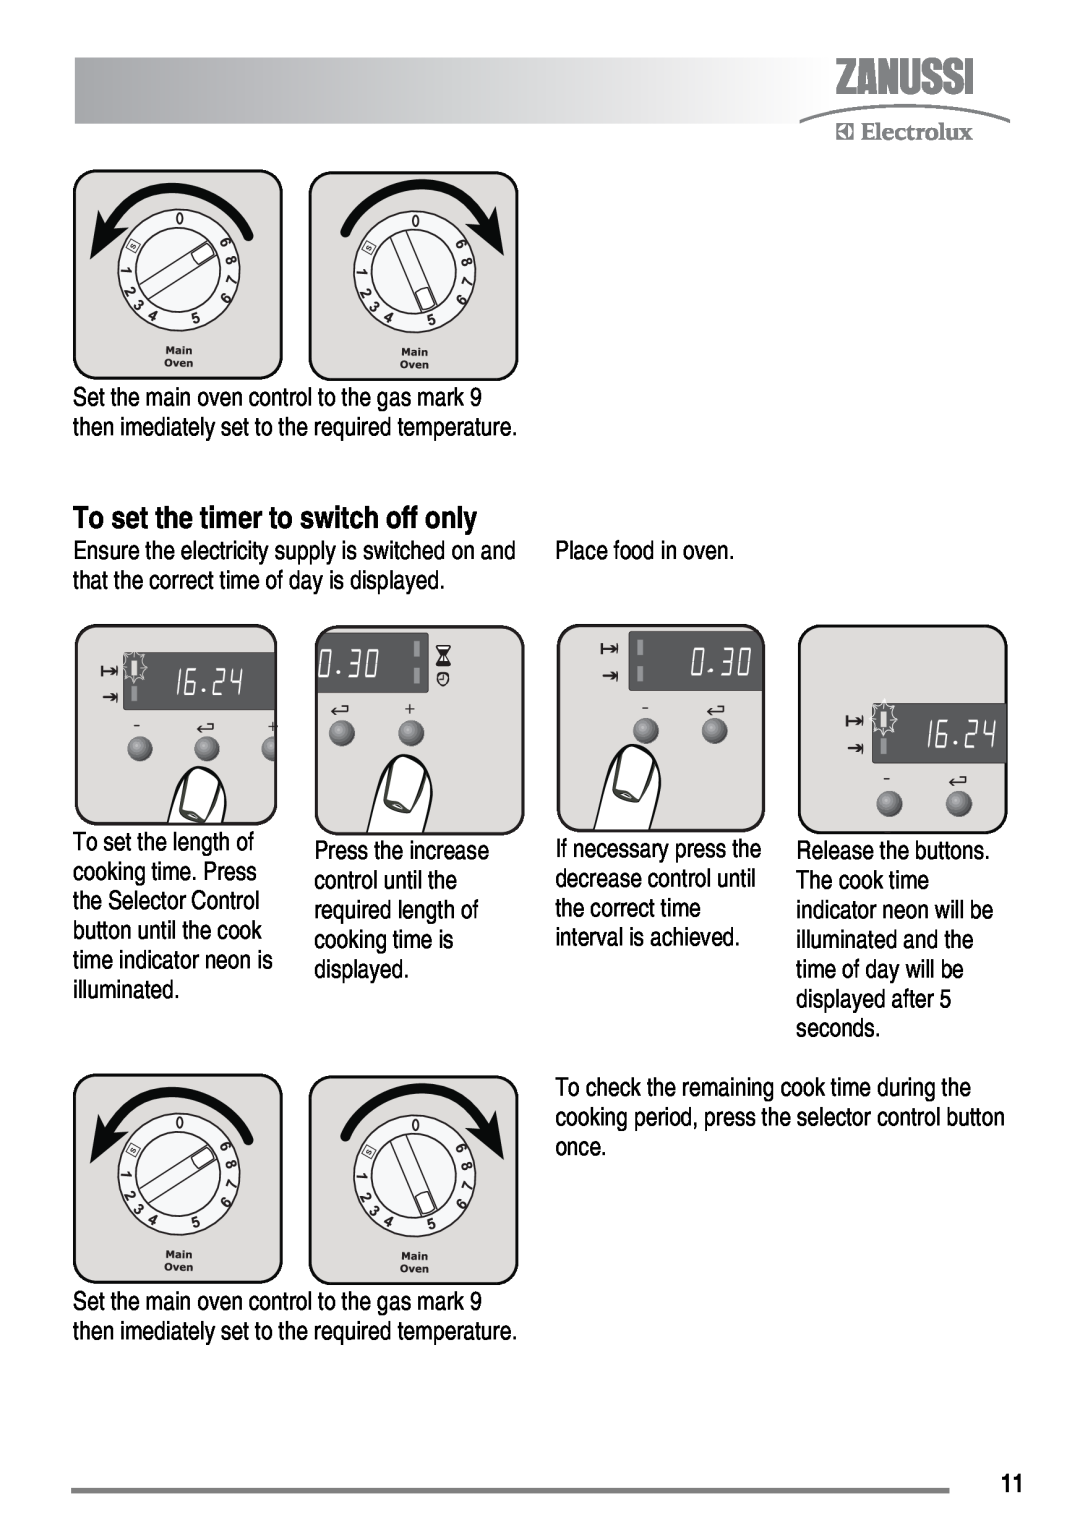 Zanussi ZKG6040 user manual To set the timer to switch off only, that the correct time of day is displayed 